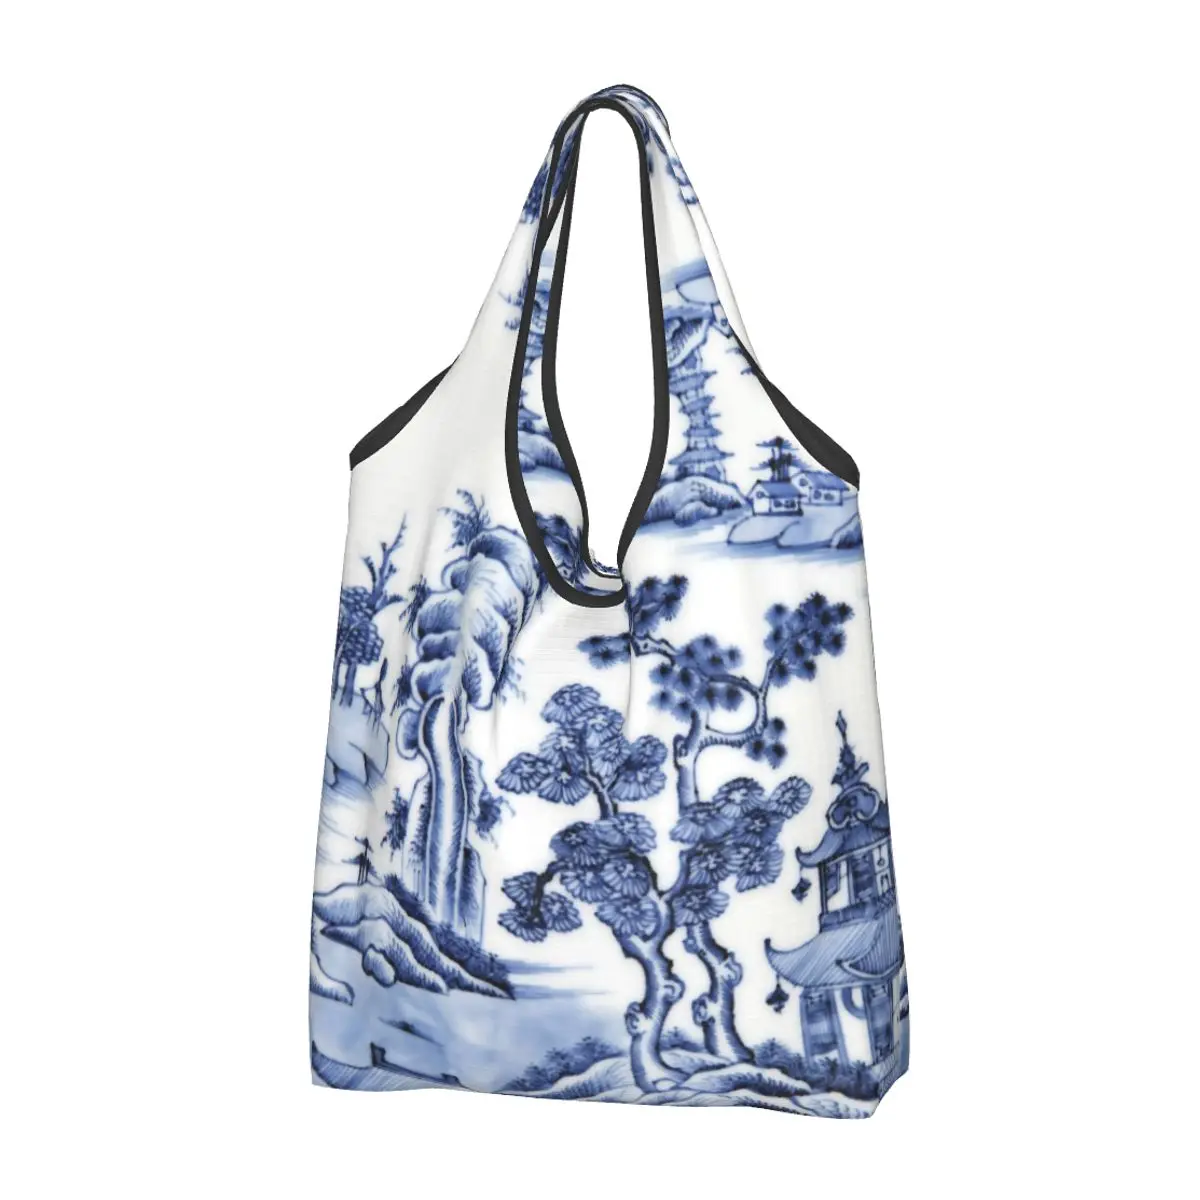 

Chinese Porcelain Blue Delft Oriental Toile Reusable Shopping Grocery Bags Foldable 50LB Weight Capacity Eco Bag Eco-Friendly